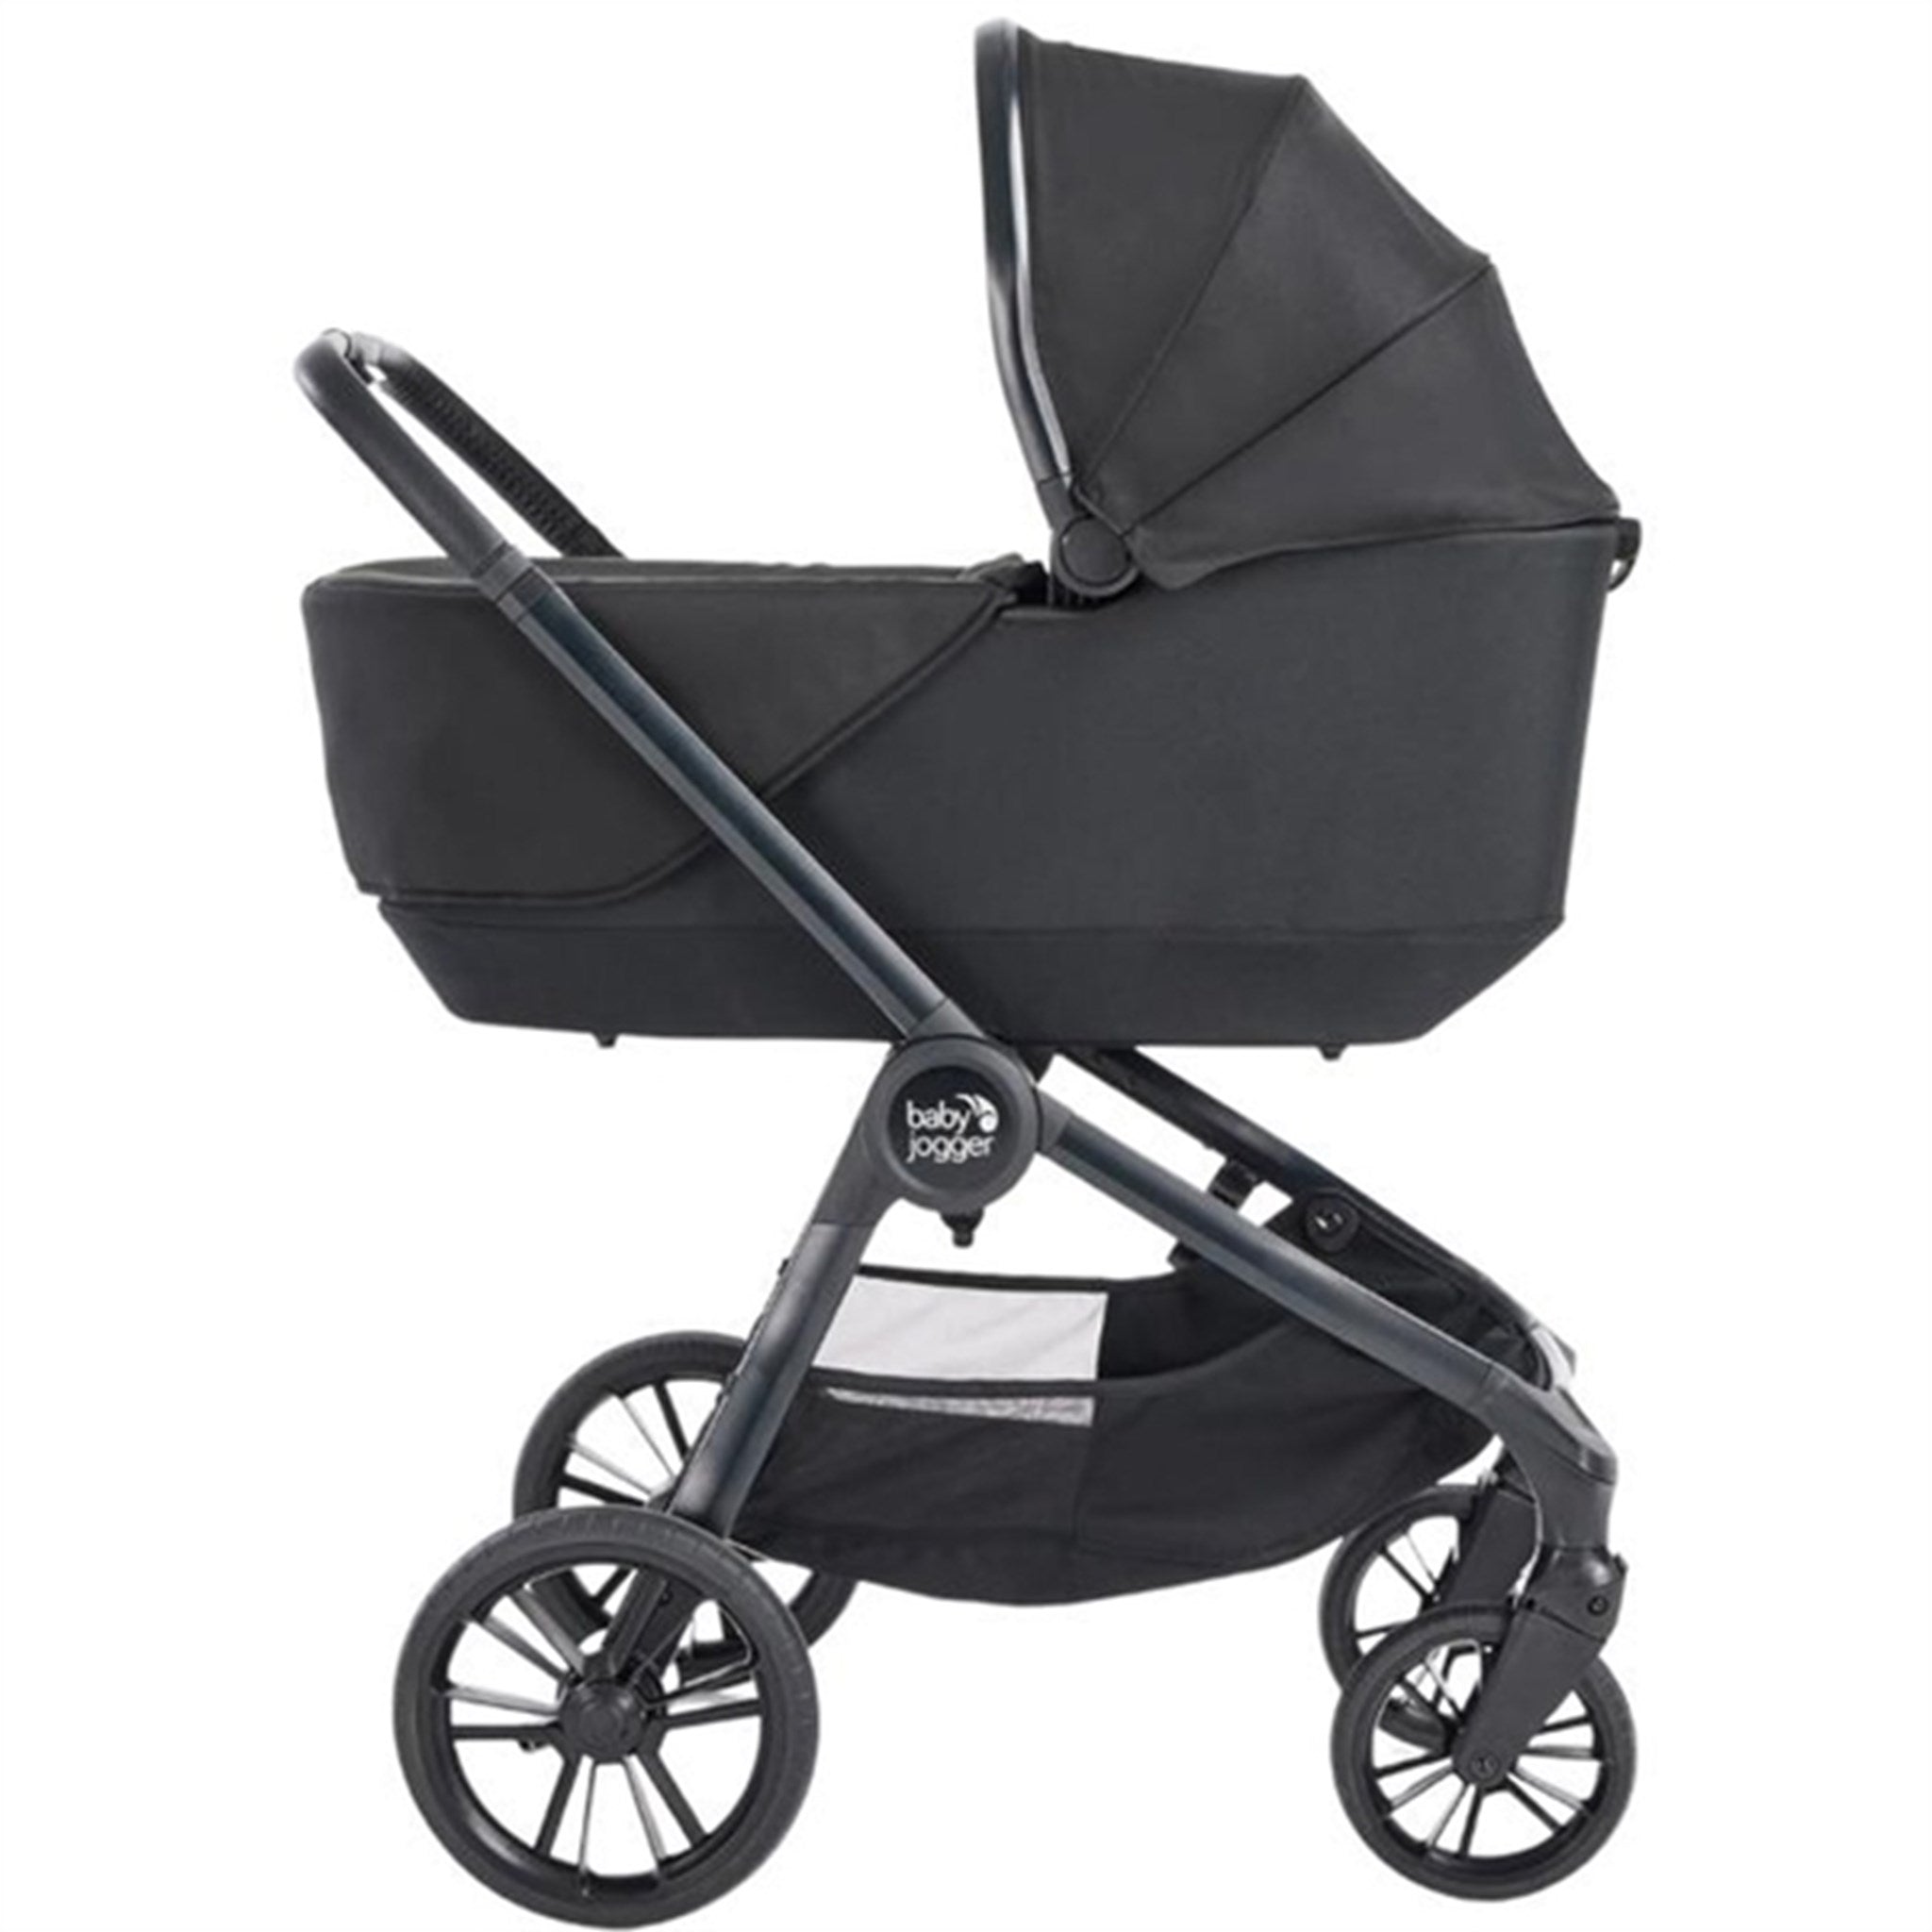 Baby Jogger Bassinet For City Sights Rich Black 2